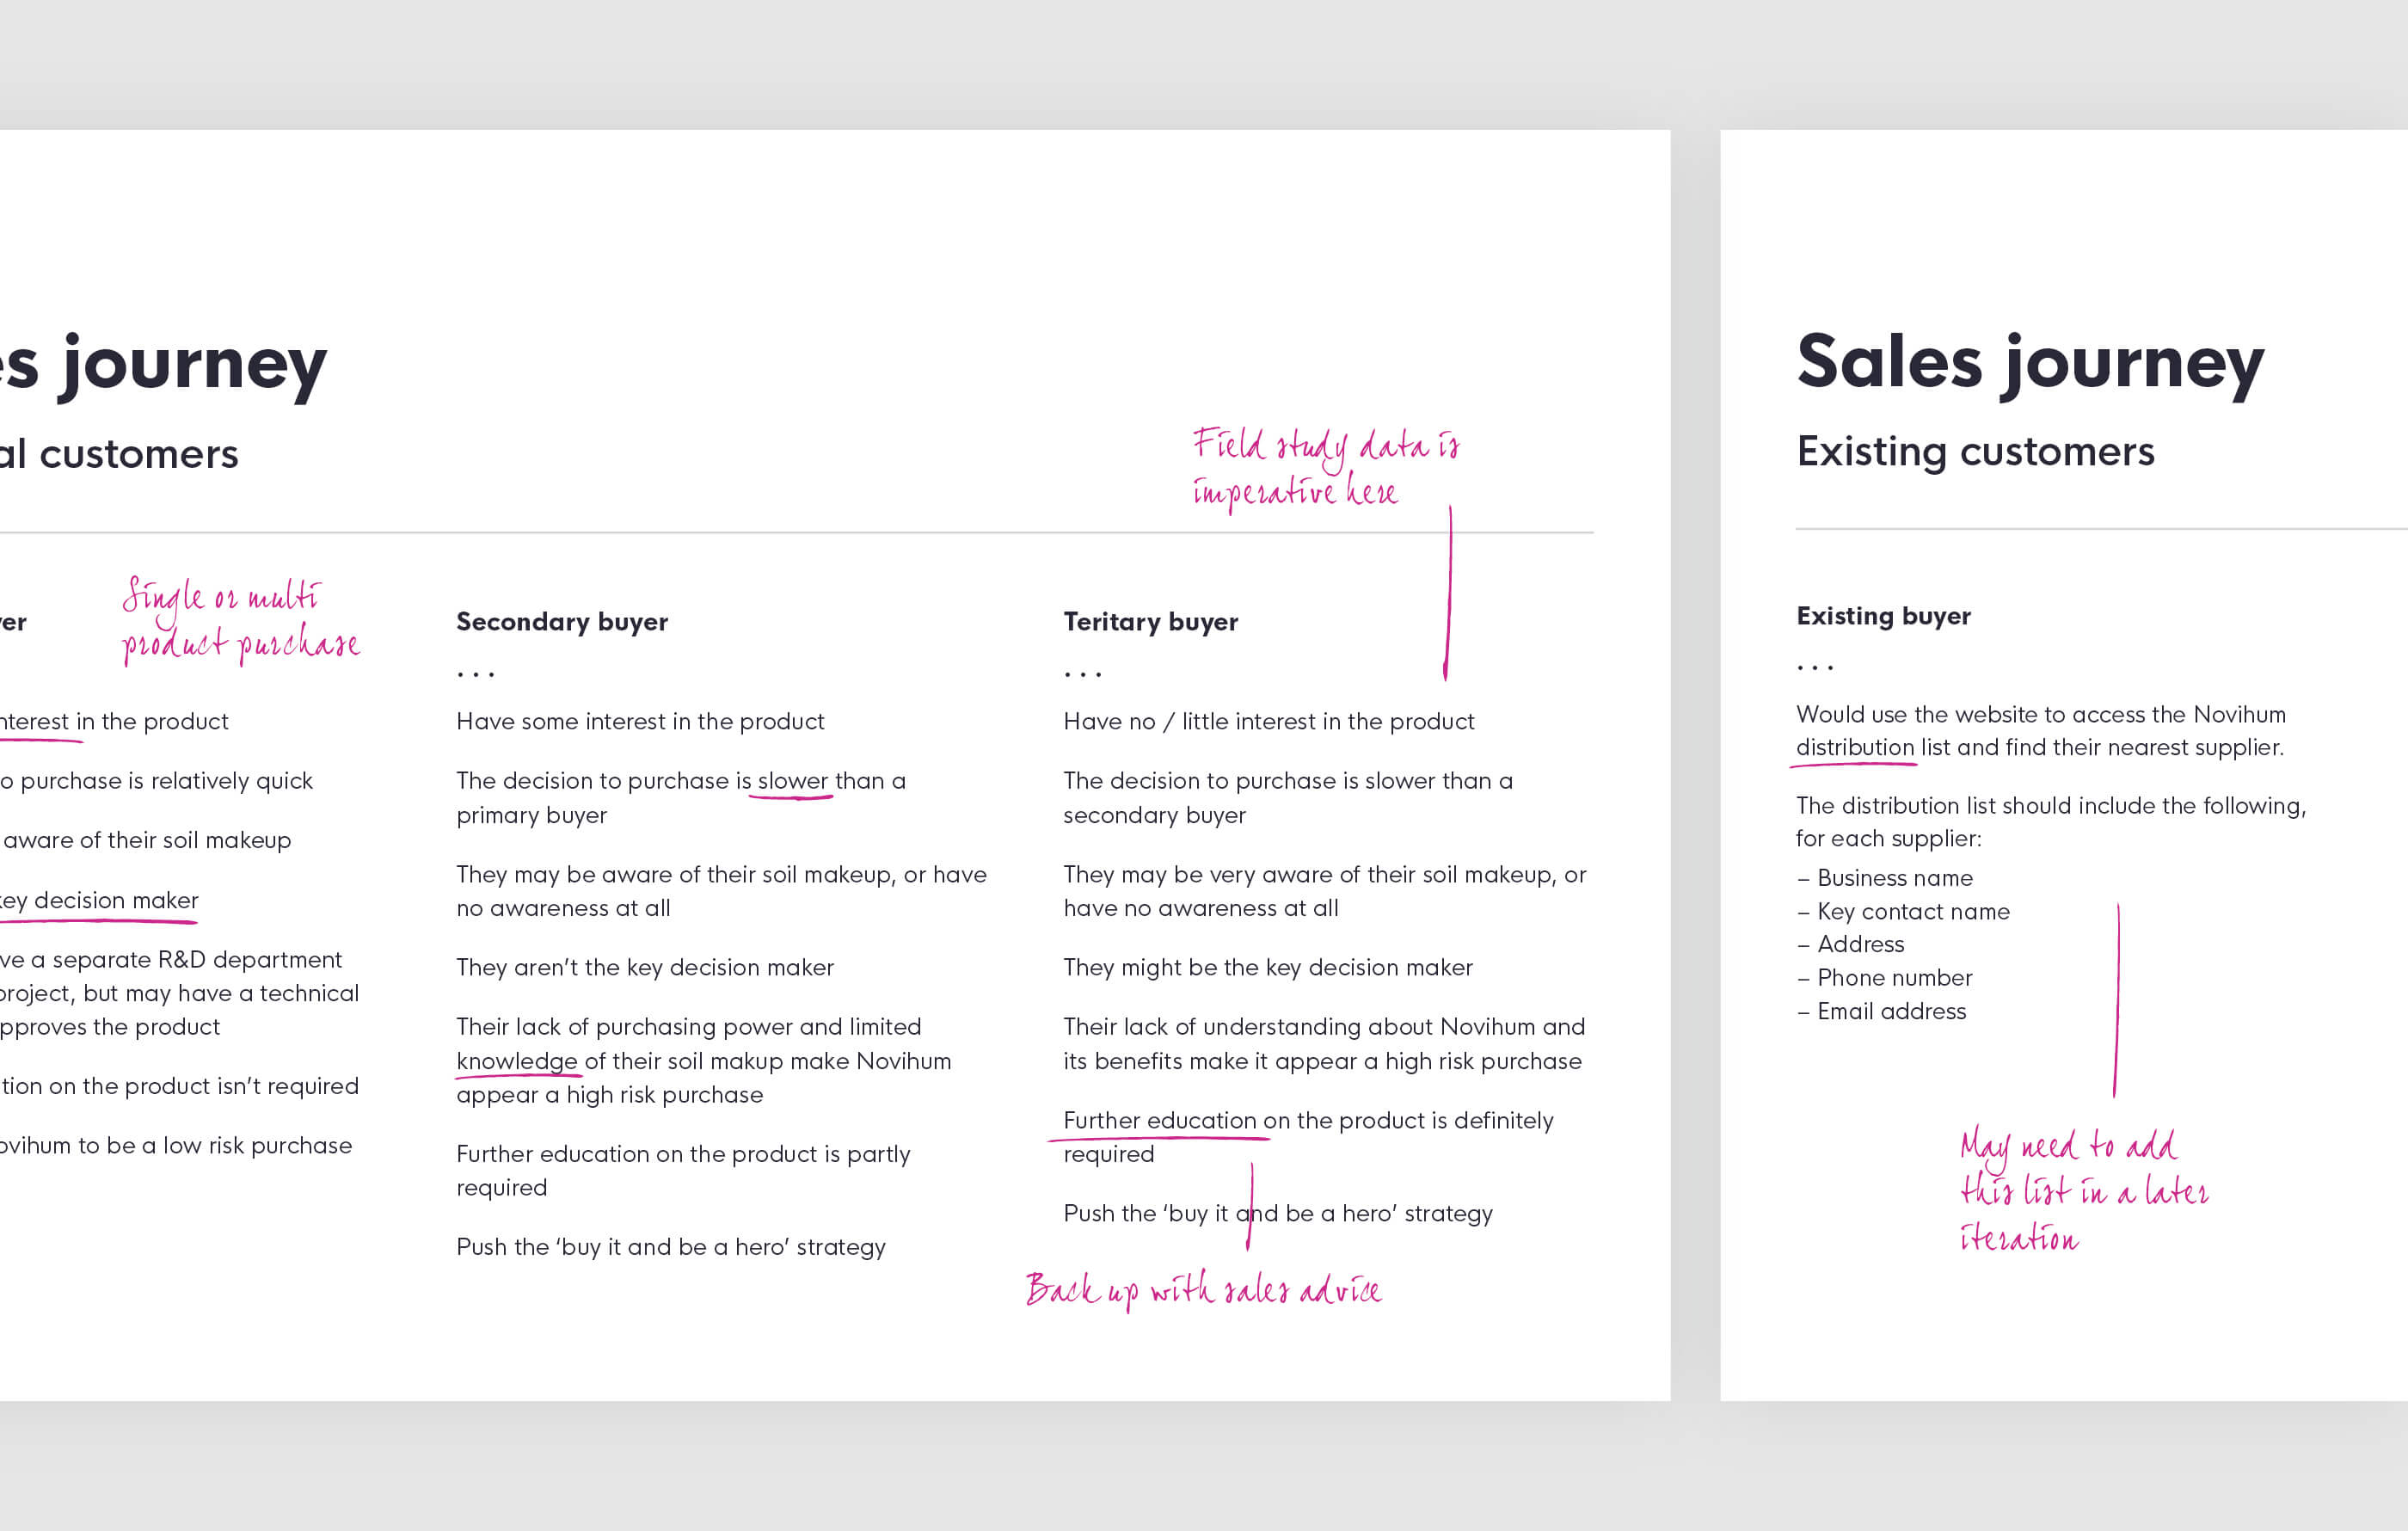 Notes and hand-written annotations, detailing the proposed sales journey for potential and existing customers within the new website